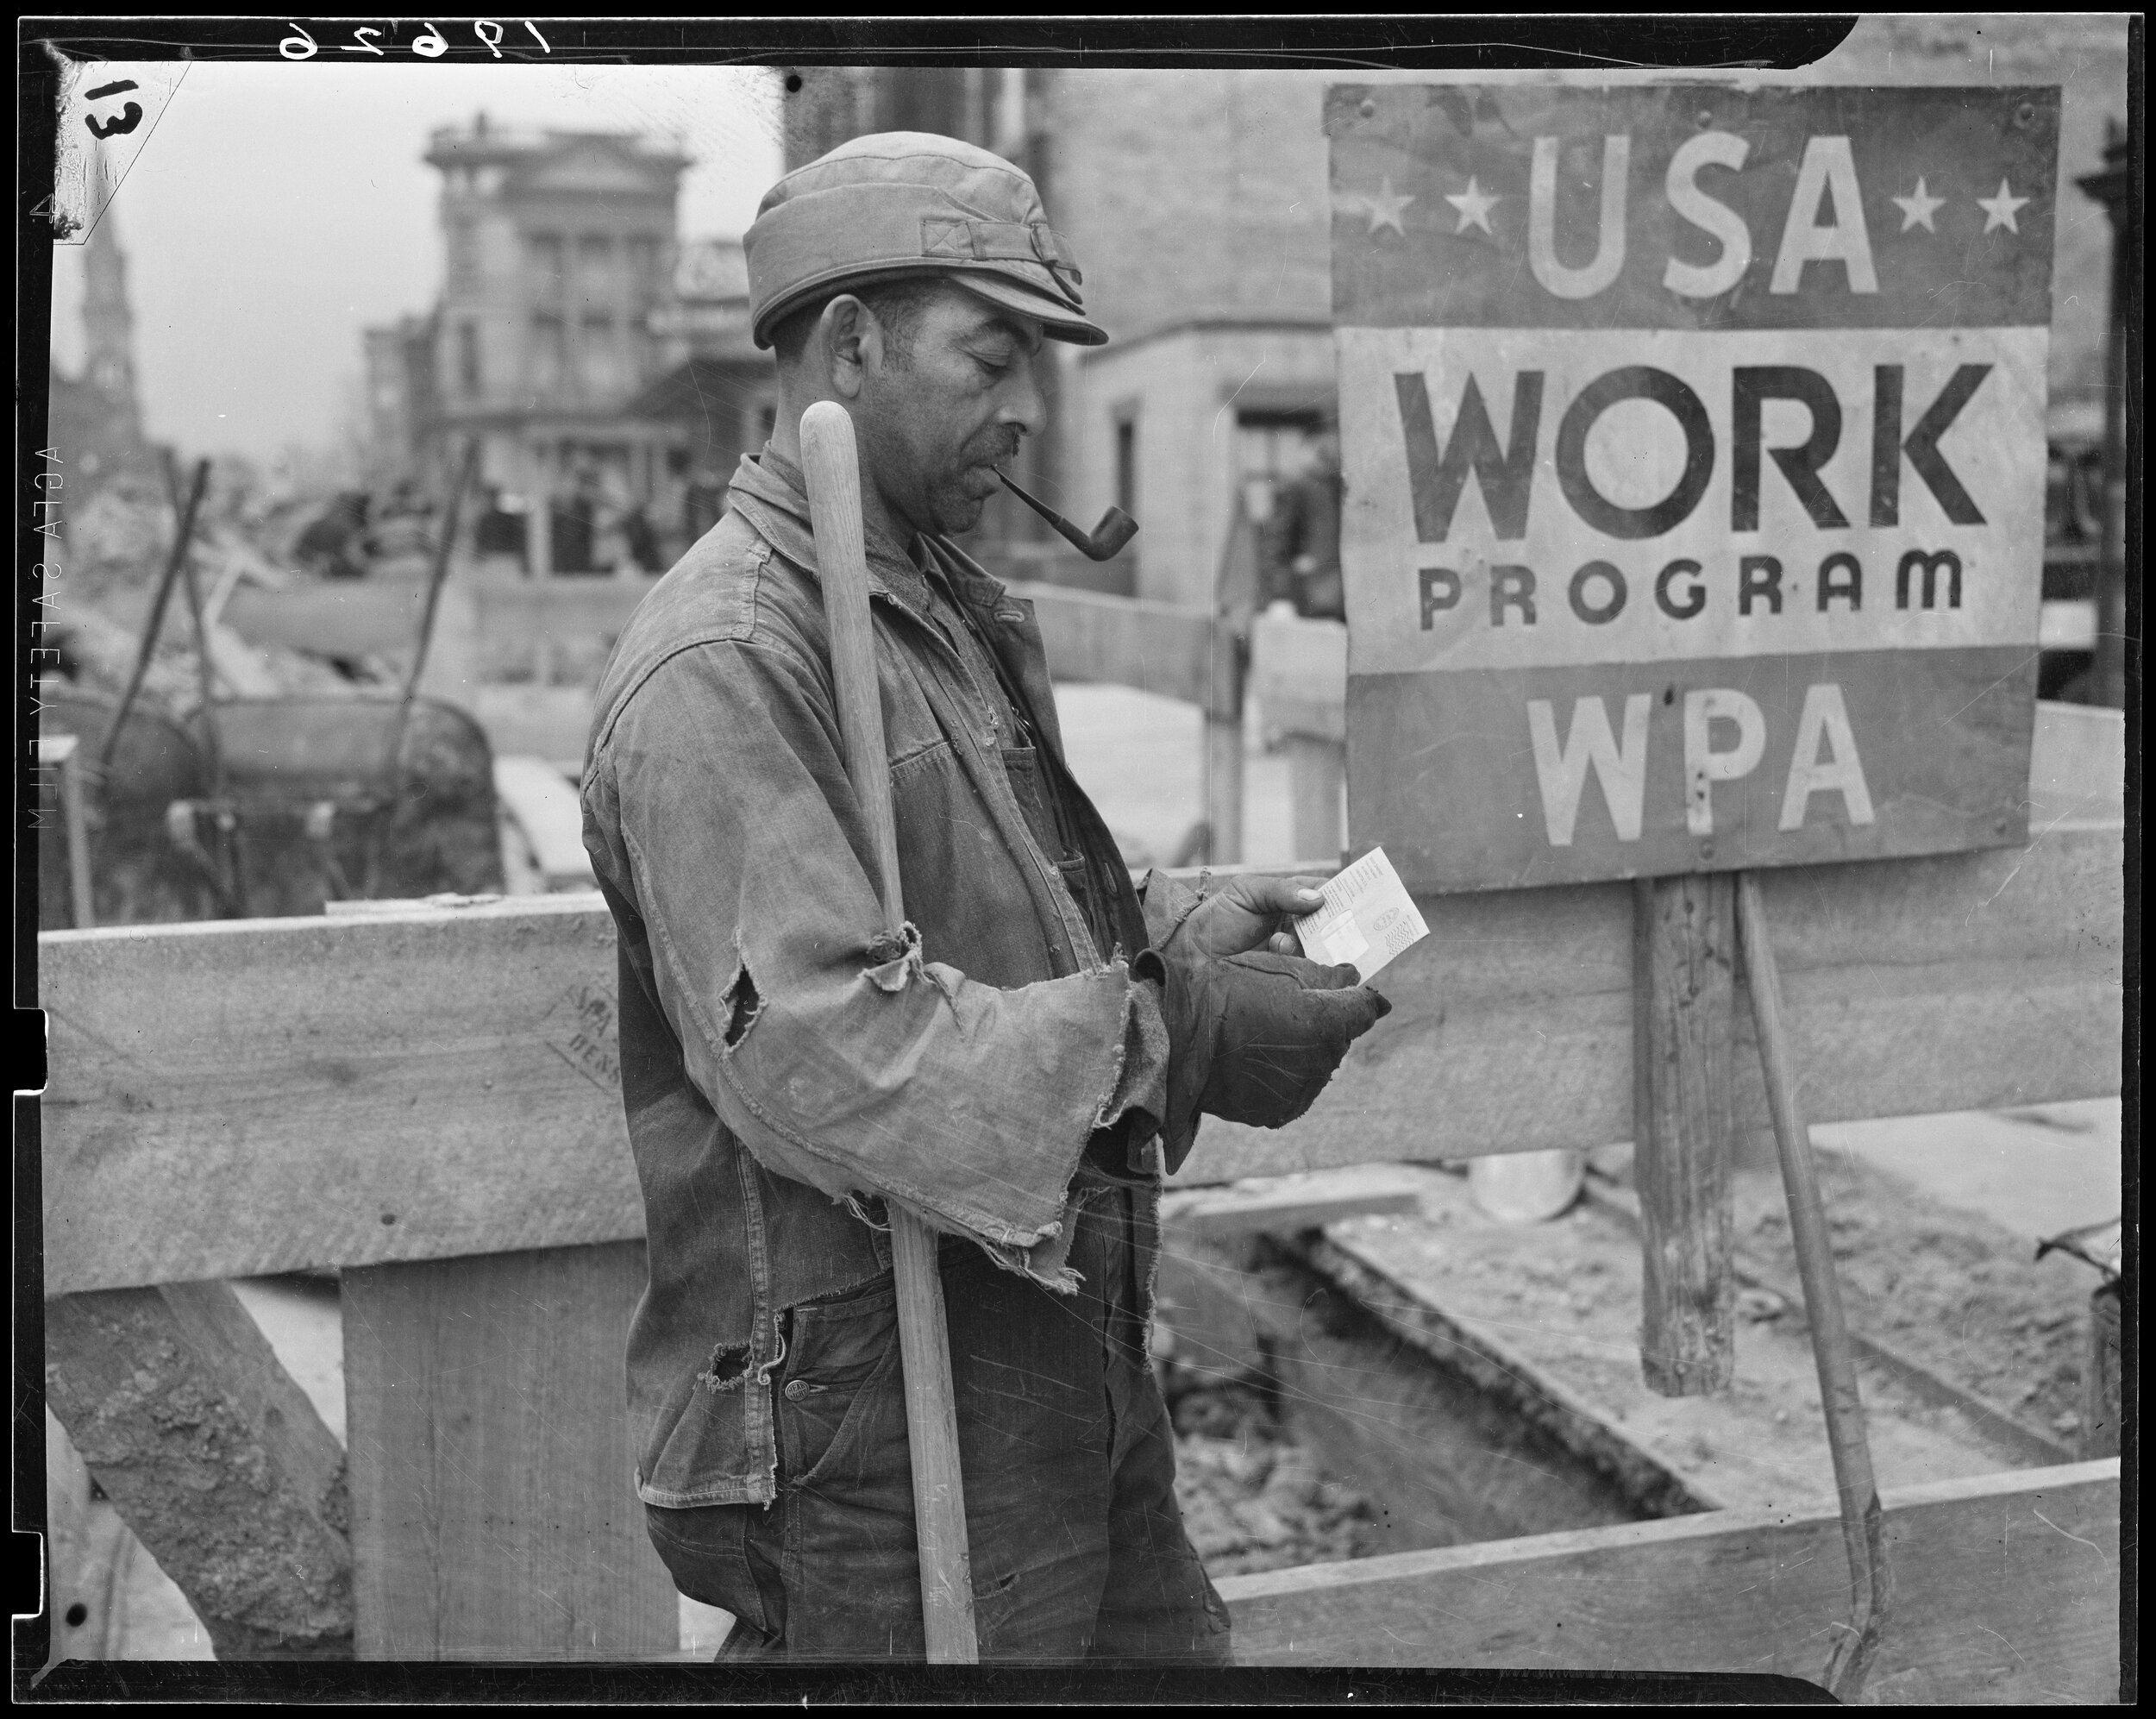 Photograph of Works Progress Administration Worker Receiving PaycheckPublic domainSeries: WPA Information Division Photographic Index, ca. 1936 - ca. 1942 Record Group 69: Records of the Work Projects Administration, 1922 - 1944